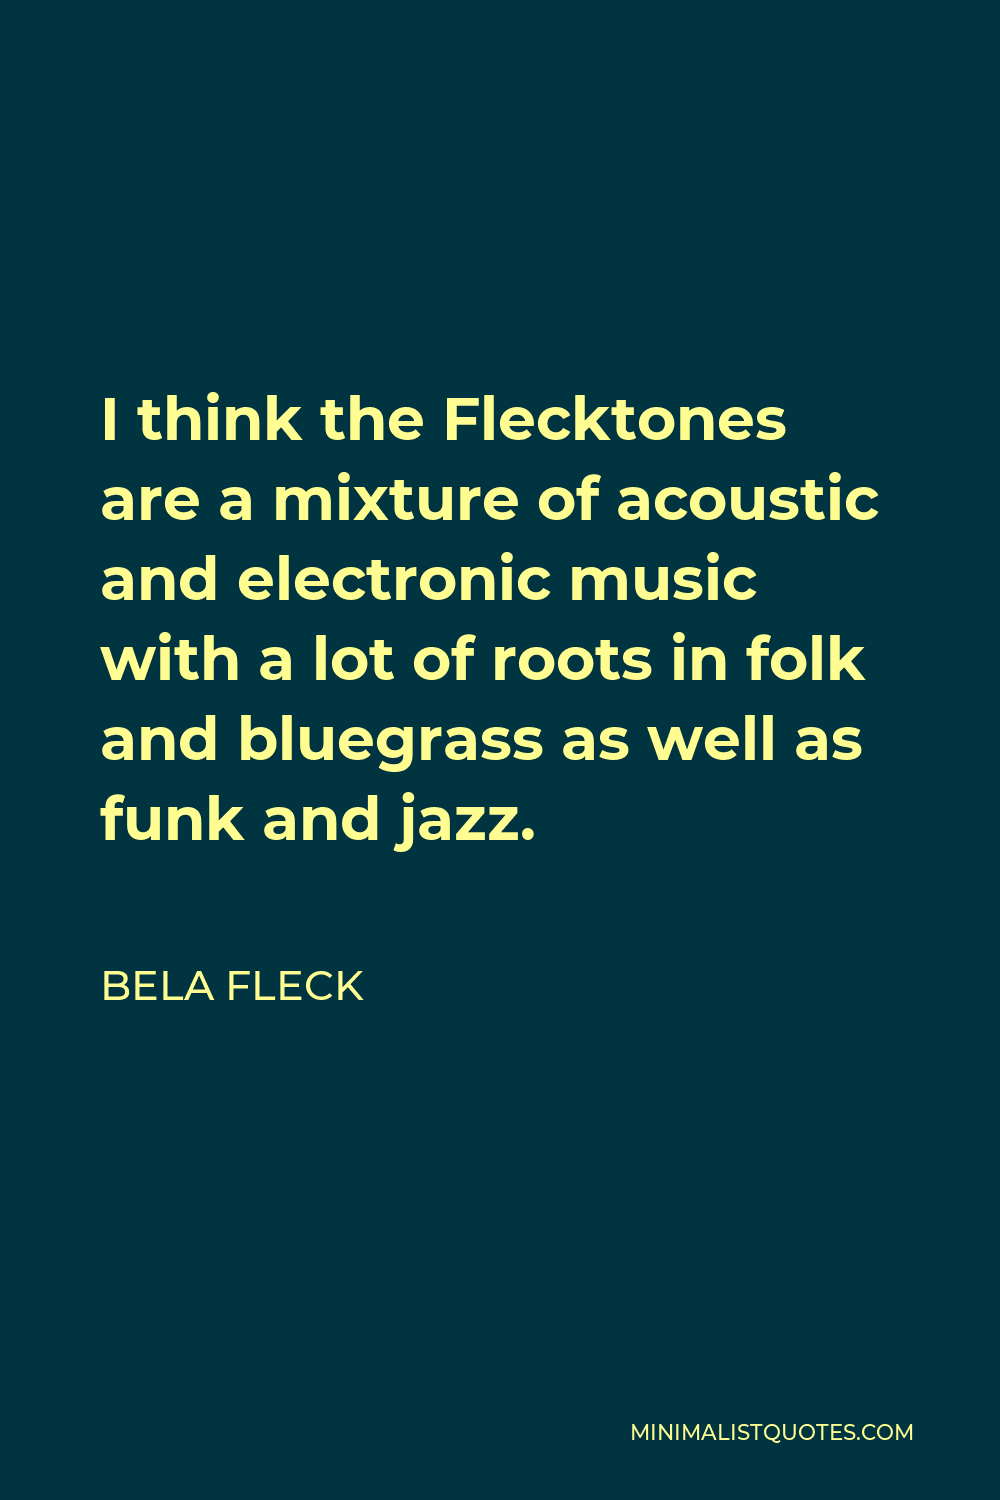 Bela Fleck Quote - I think the Flecktones are a mixture of acoustic and electronic music with a lot of roots in folk and bluegrass as well as funk and jazz.